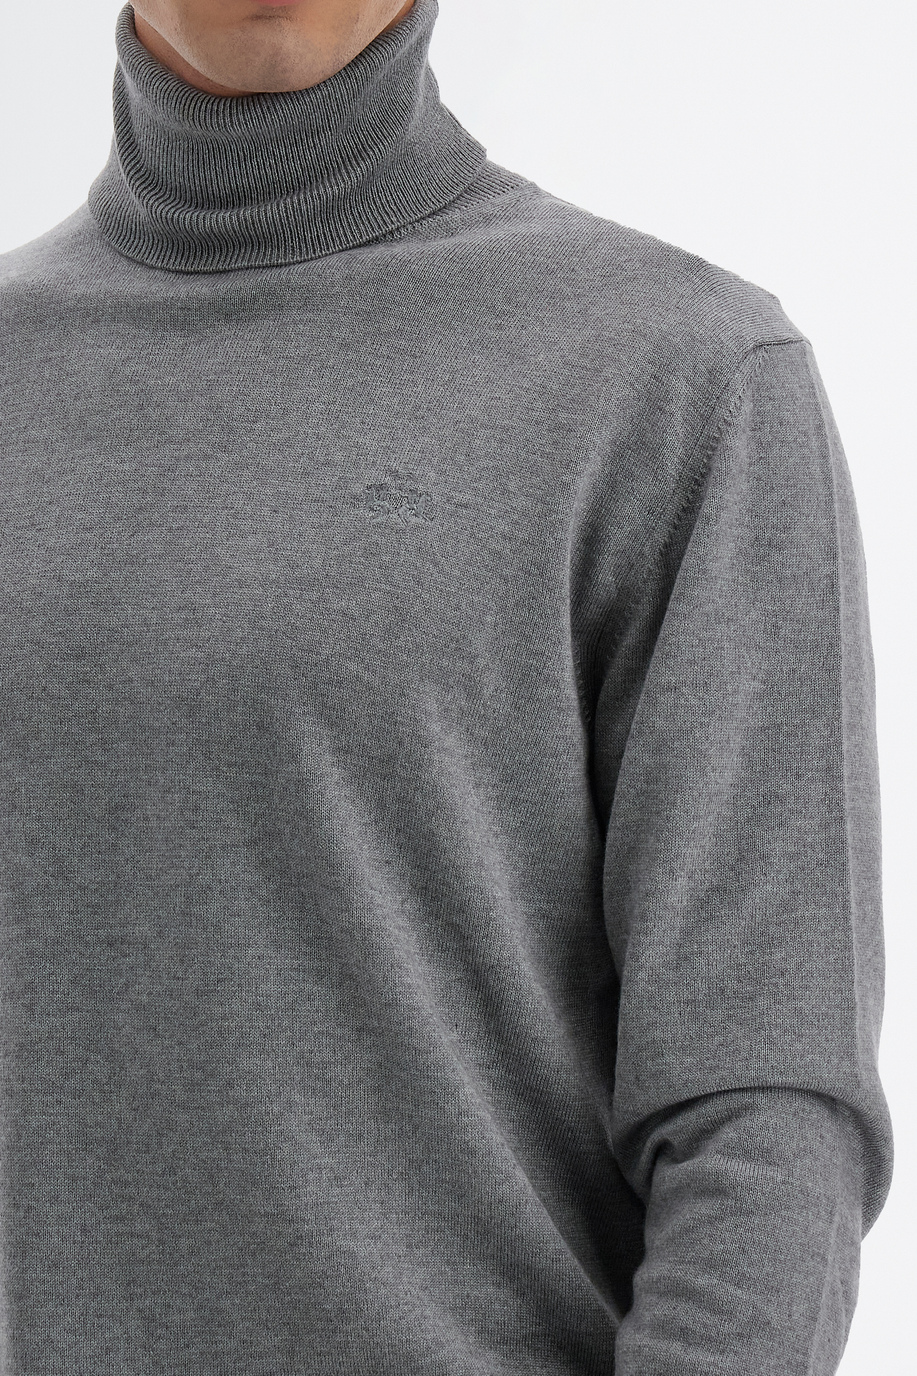 Men’s sweater with long sleeves high neck in cotton and wool blend regular fit - Premium wools | La Martina - Official Online Shop